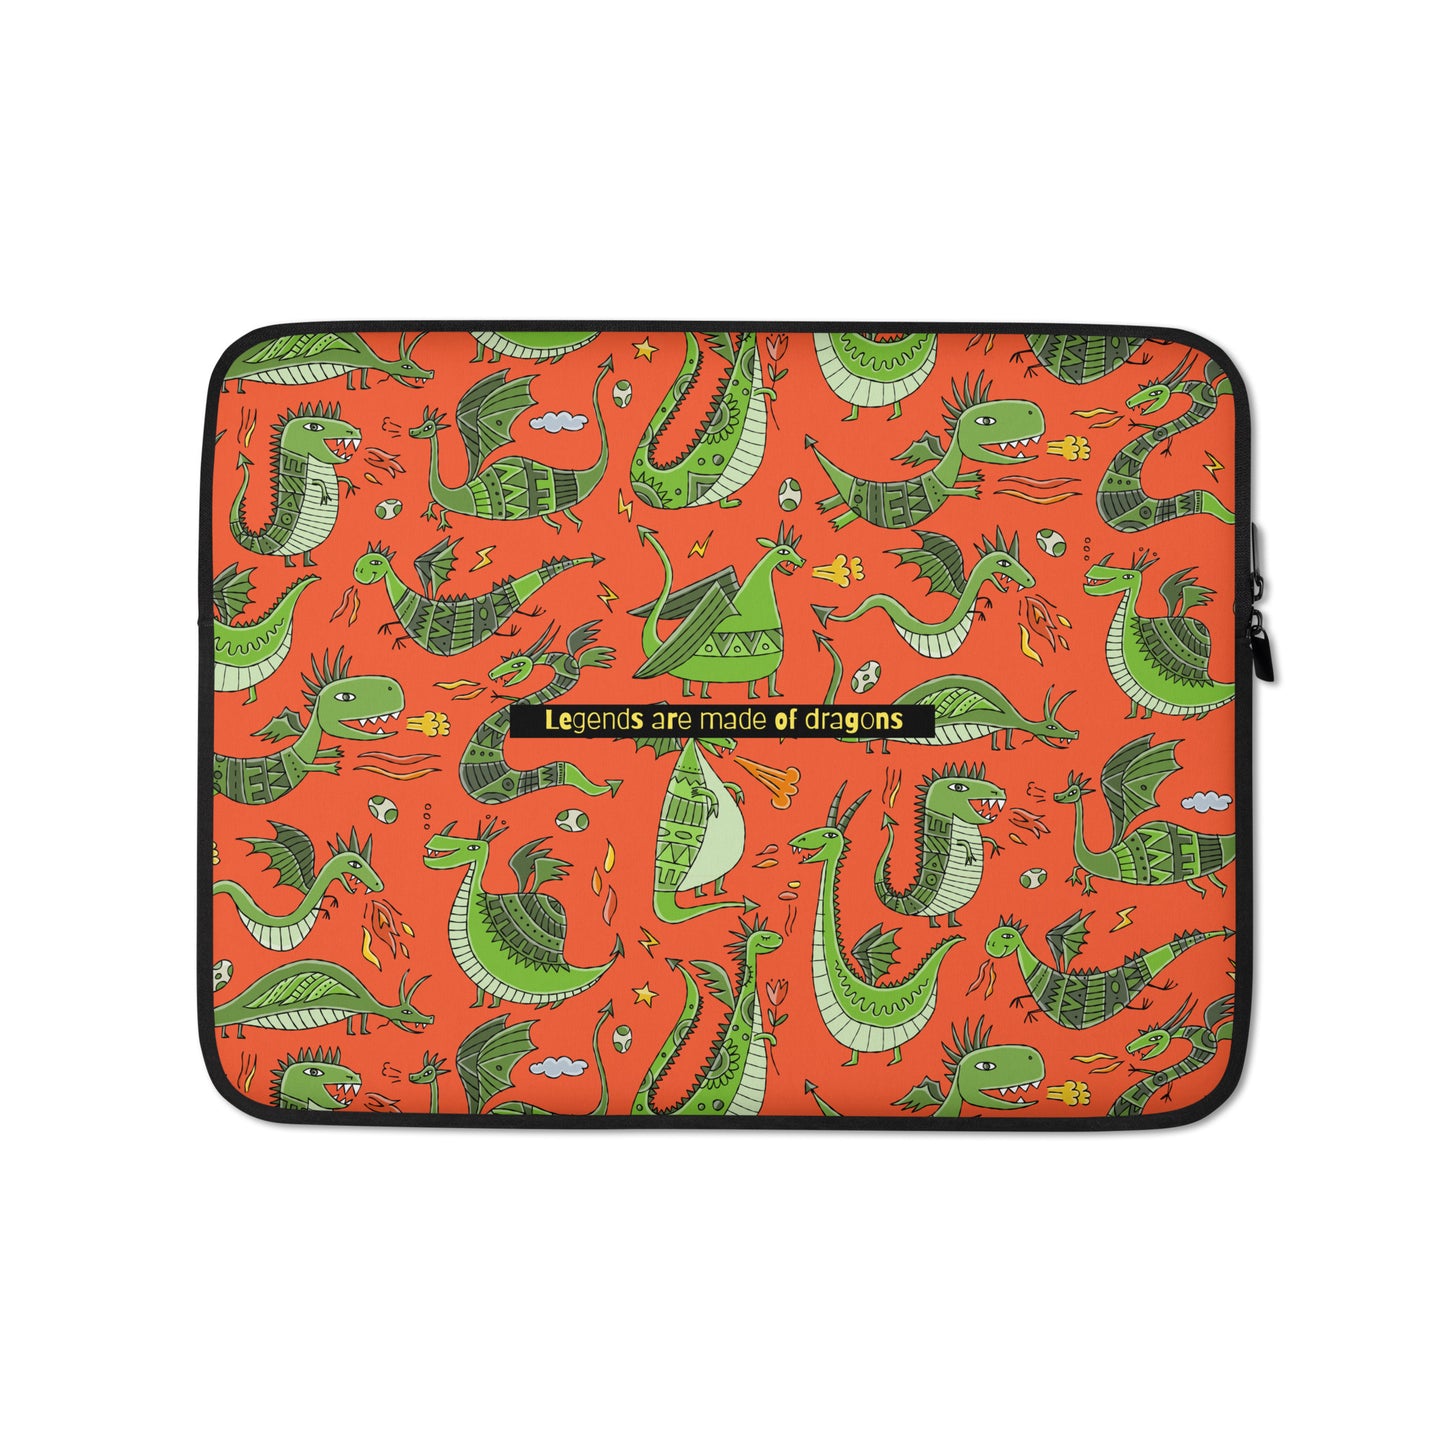 Personalised Laptop Sleeve / Custom Cover 13 with funny green Dragons on red background. Basic text (Legends are made of Dragons) can be changed or delete